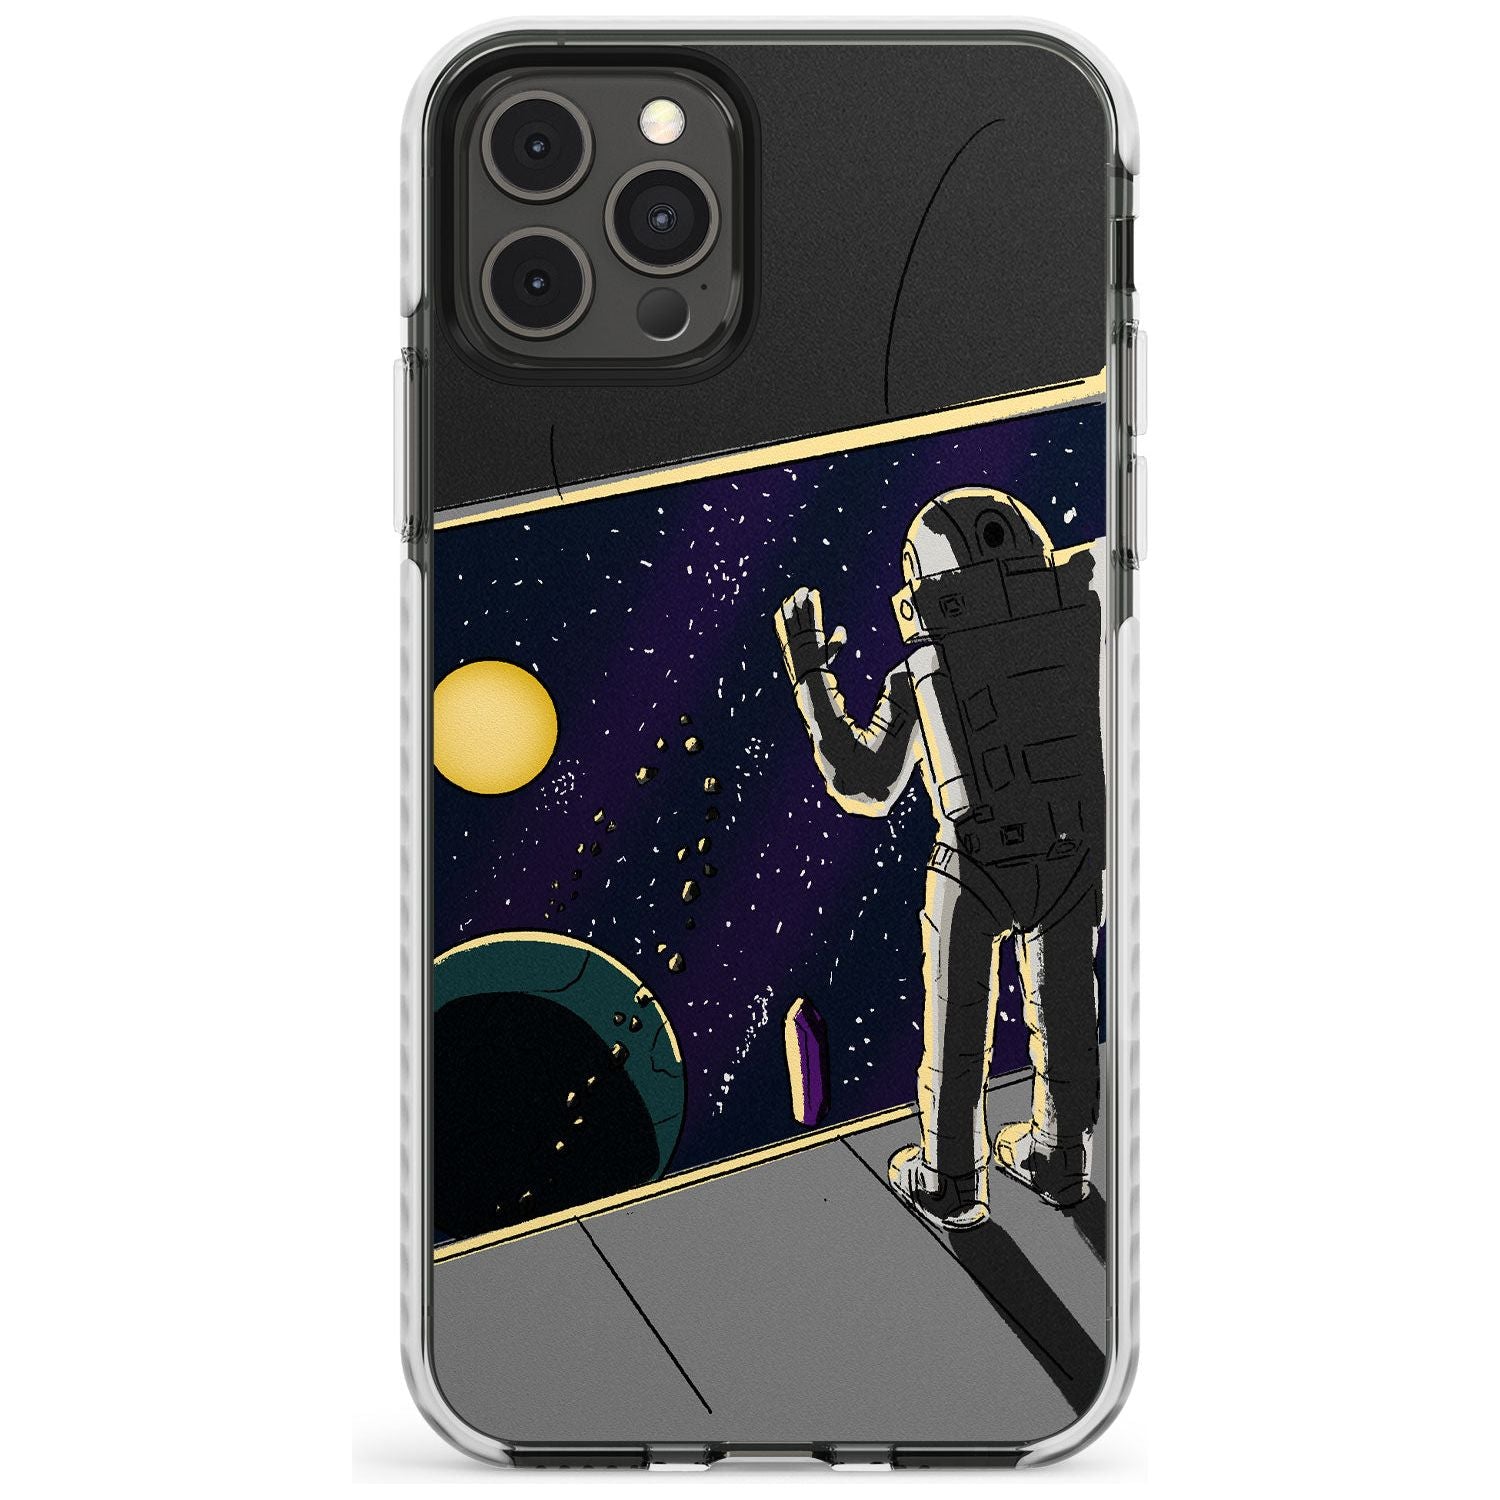 HOME Slim TPU Phone Case for iPhone 11 Pro Max